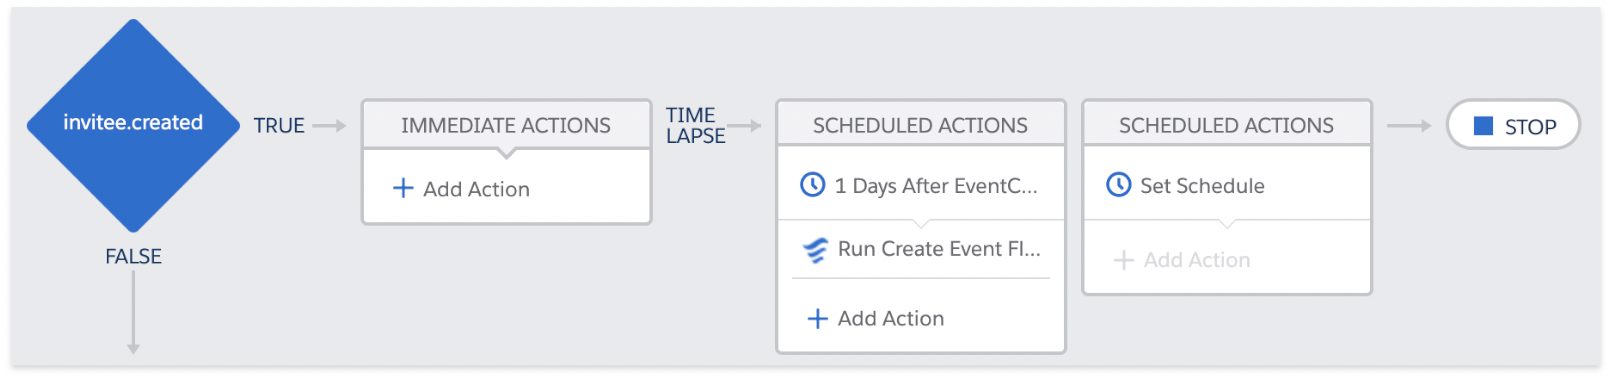 Create_Event_Flow_Scheduled_Process_Builder_SF_Classic_09FEB2021.png